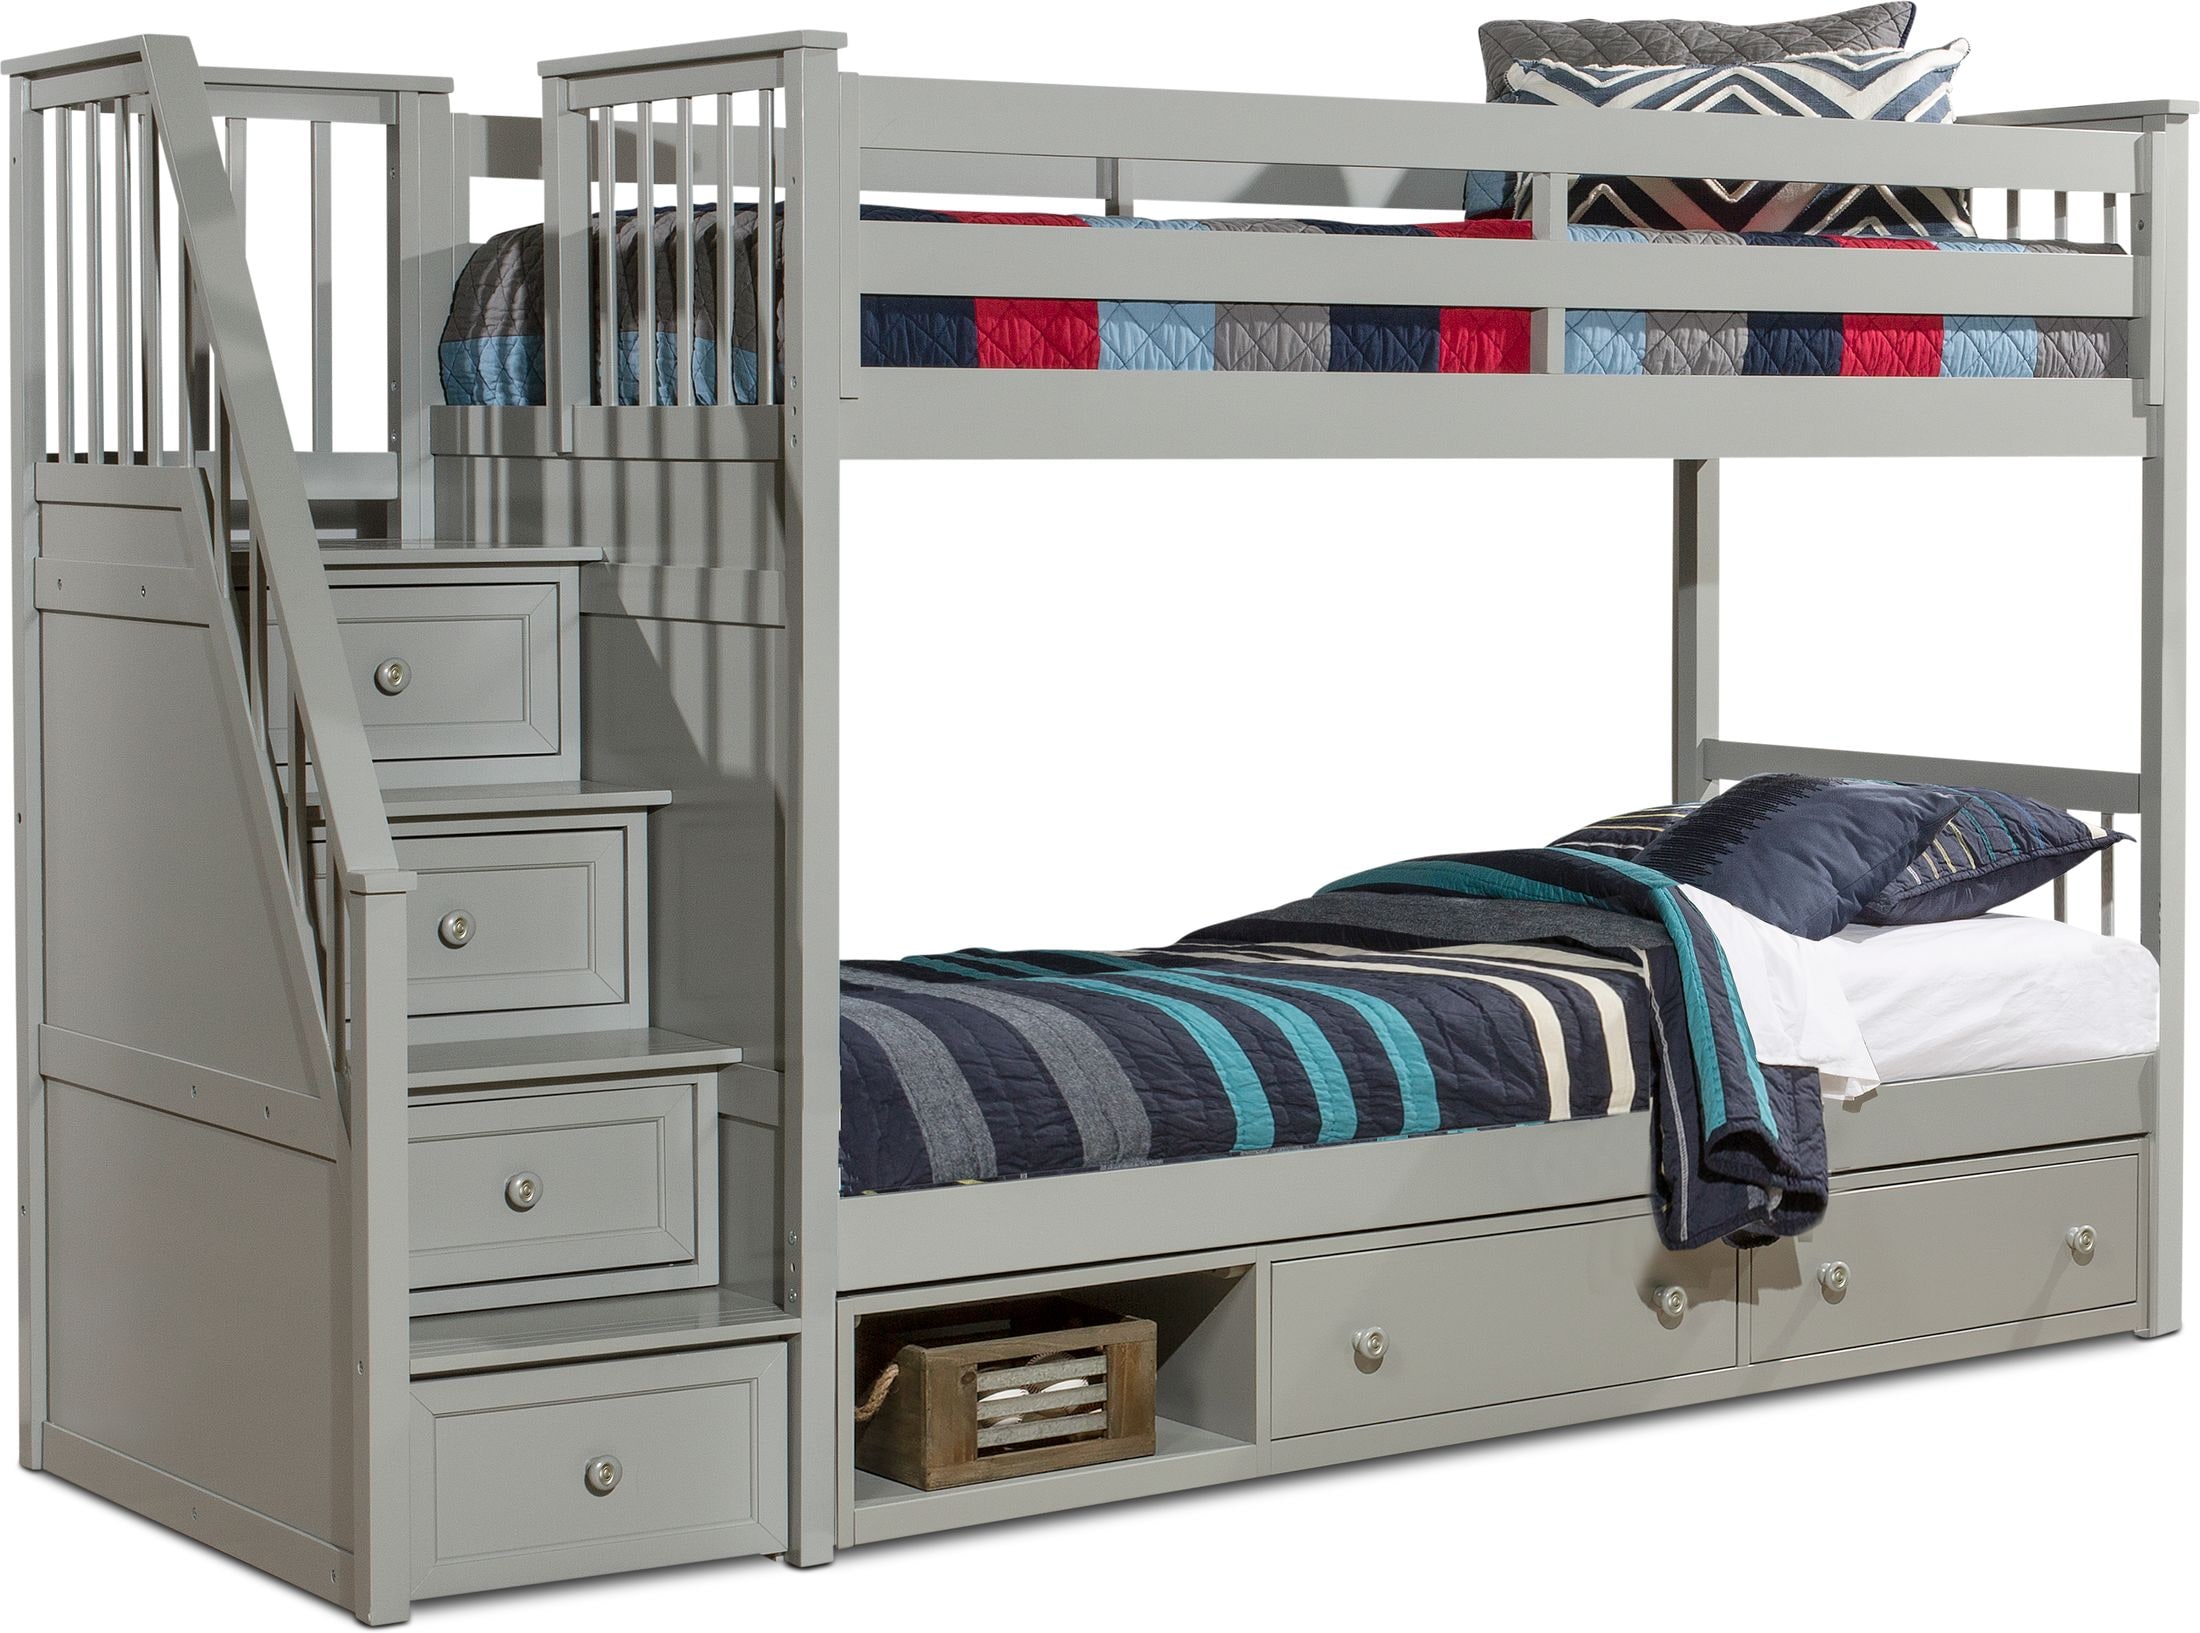 bunk beds with drawers in stairs